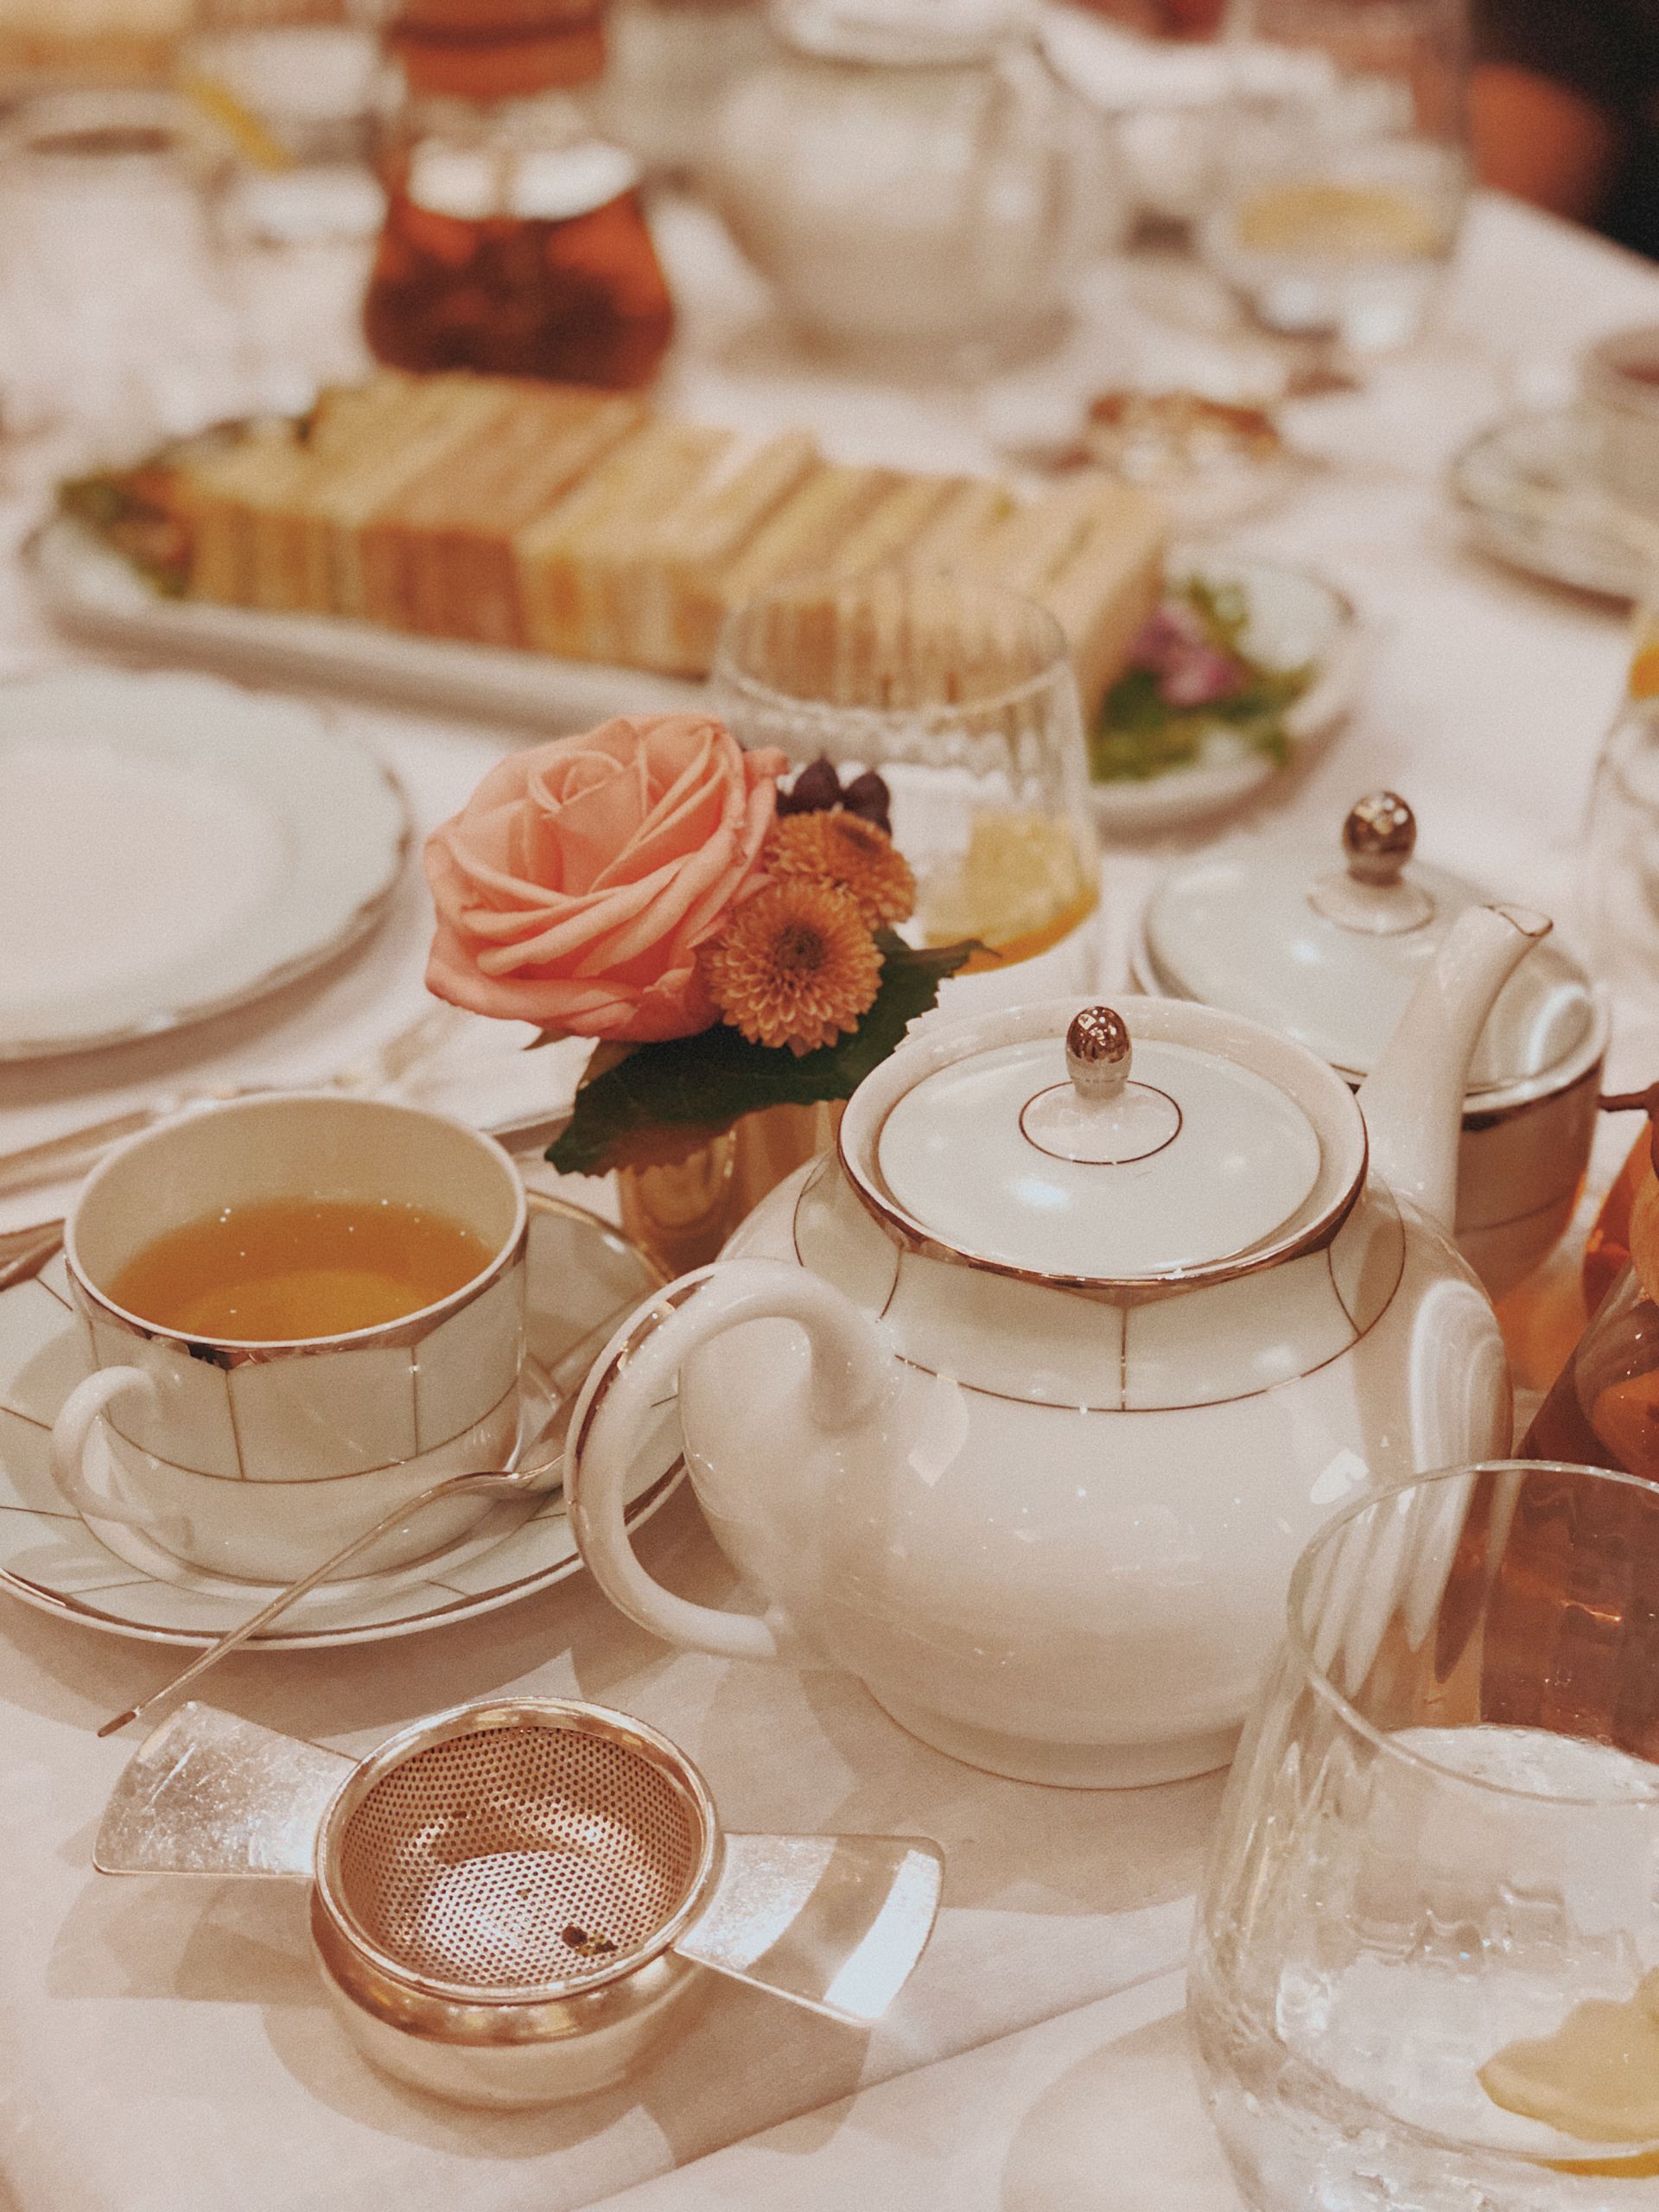 An afternoon of tea at The Dorchester